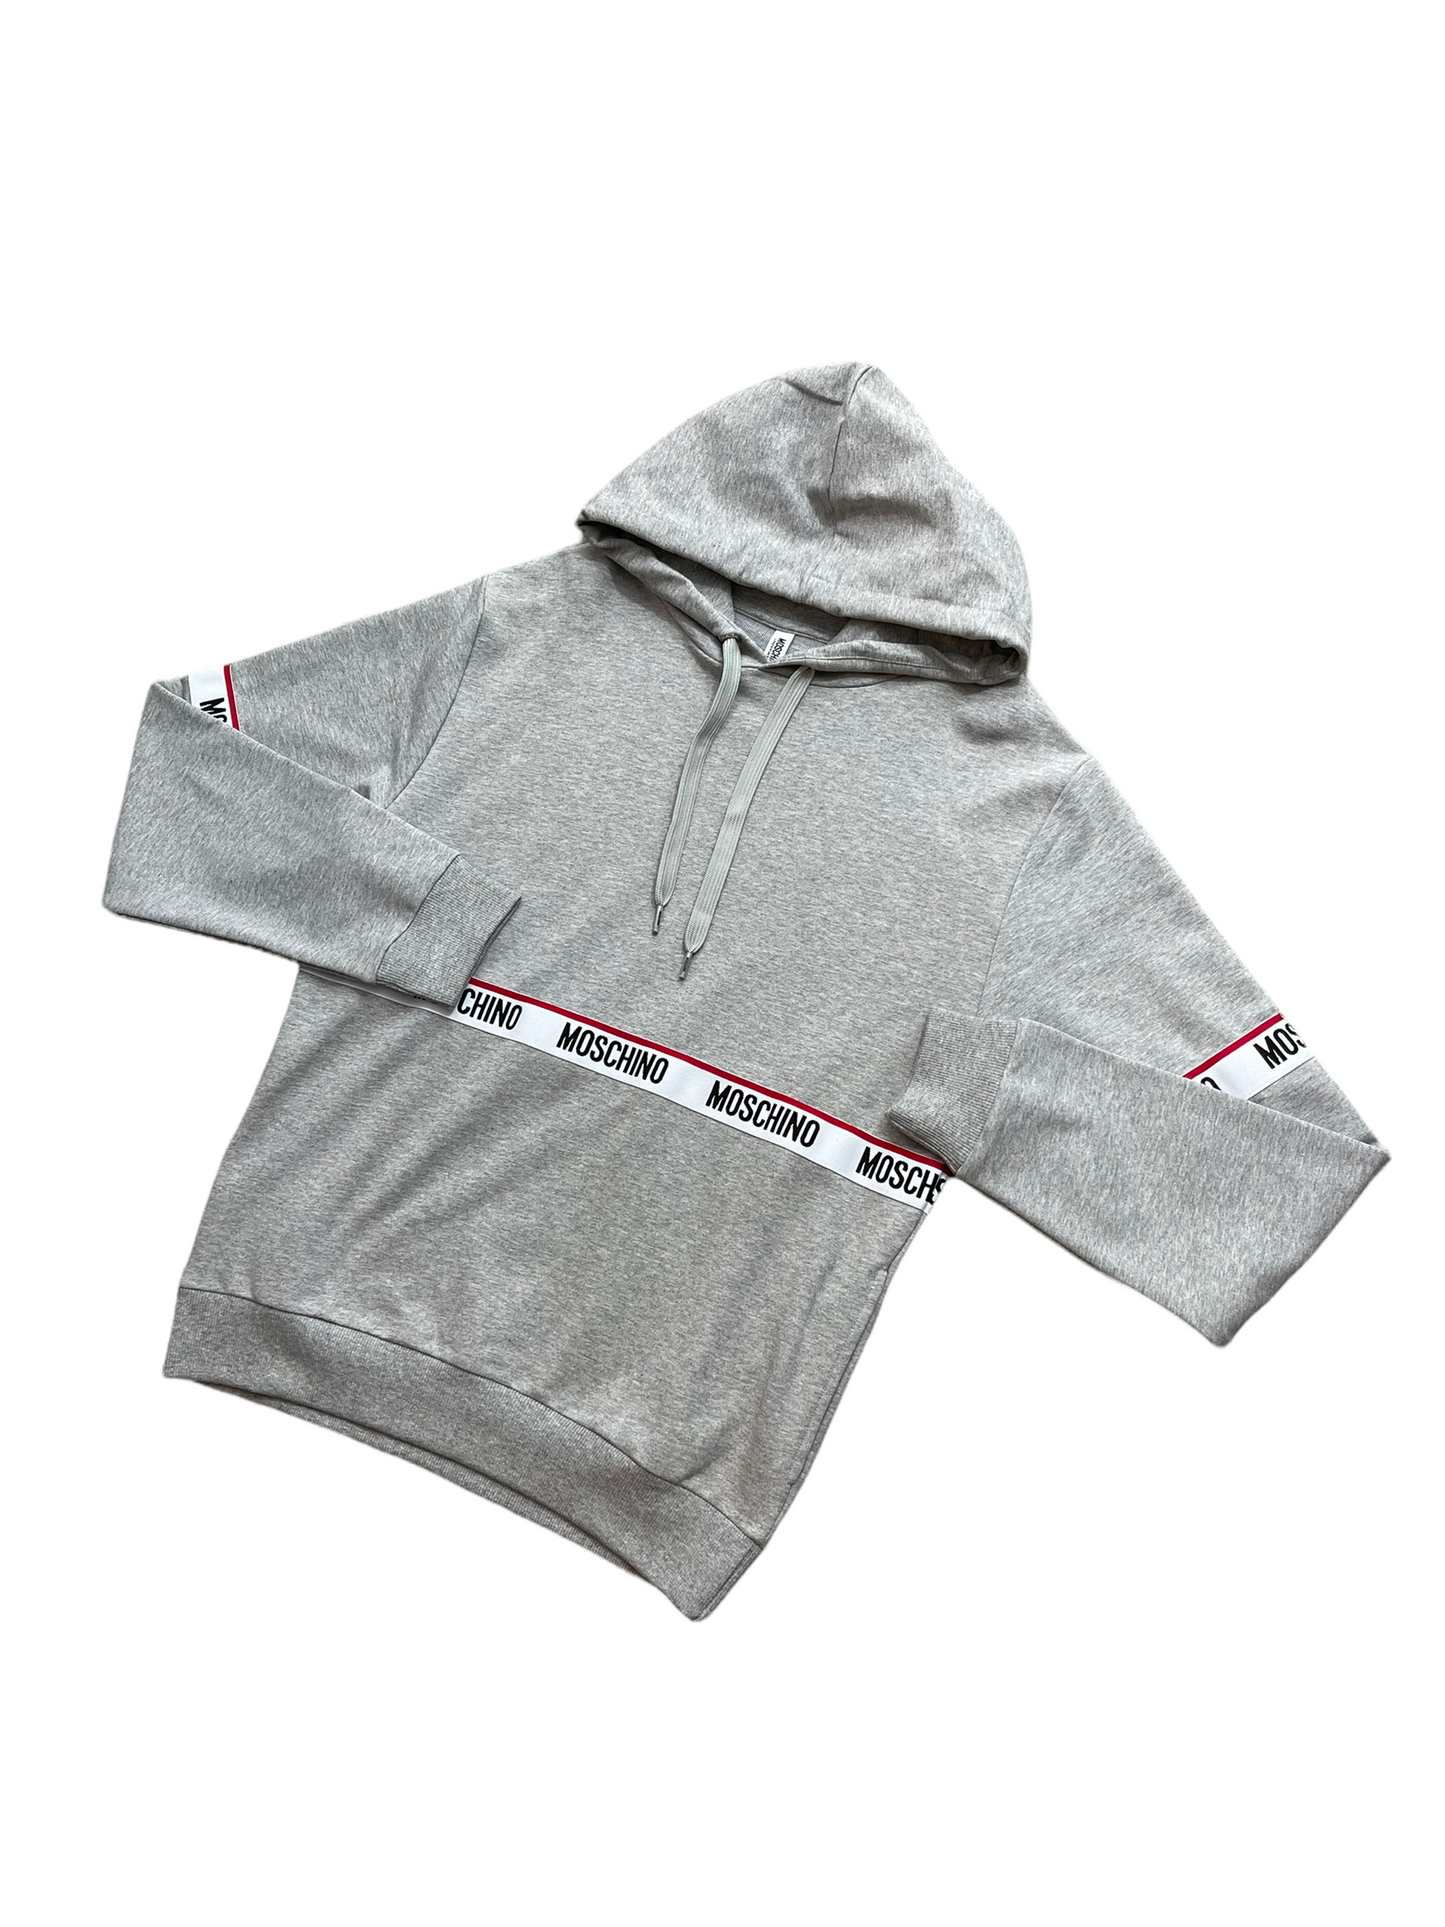 MOSCHINO TAPE PULLOVER HOODIE - GREY